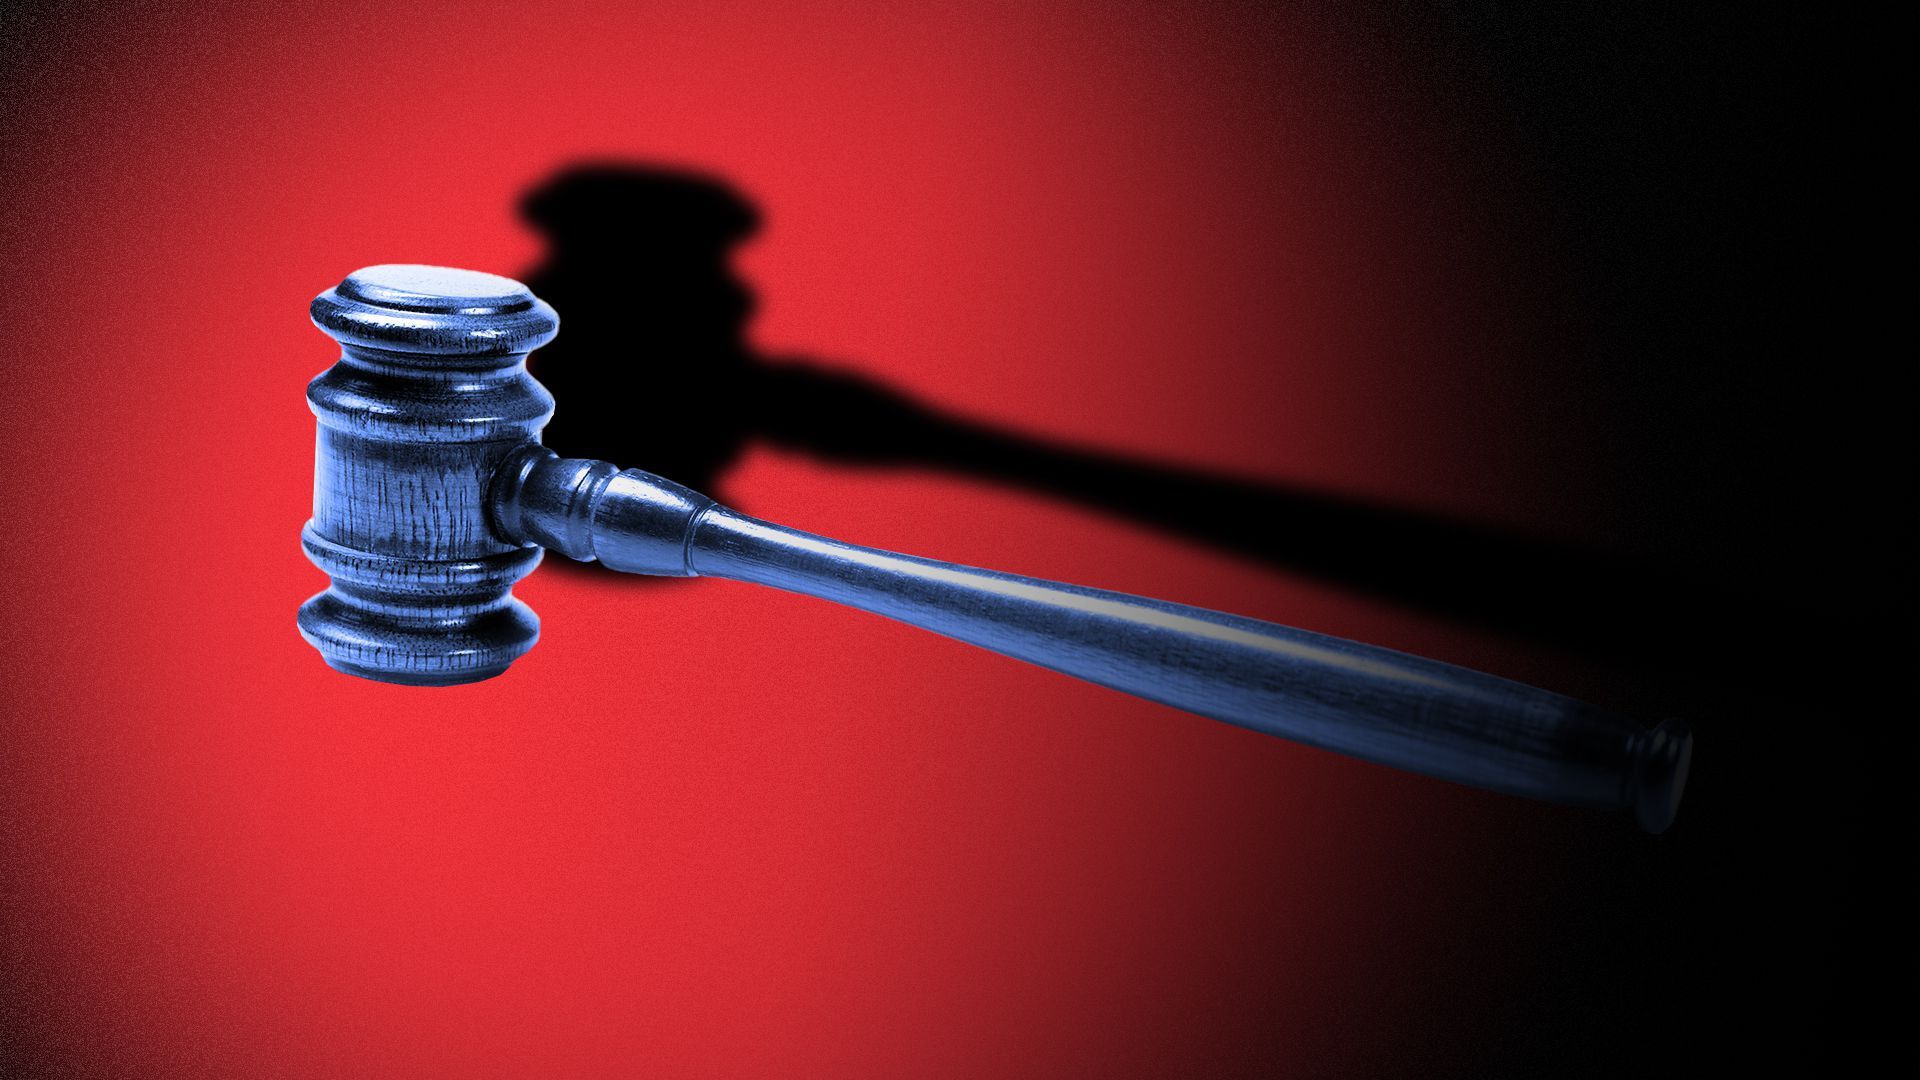 Illustration of a gavel against a red background.